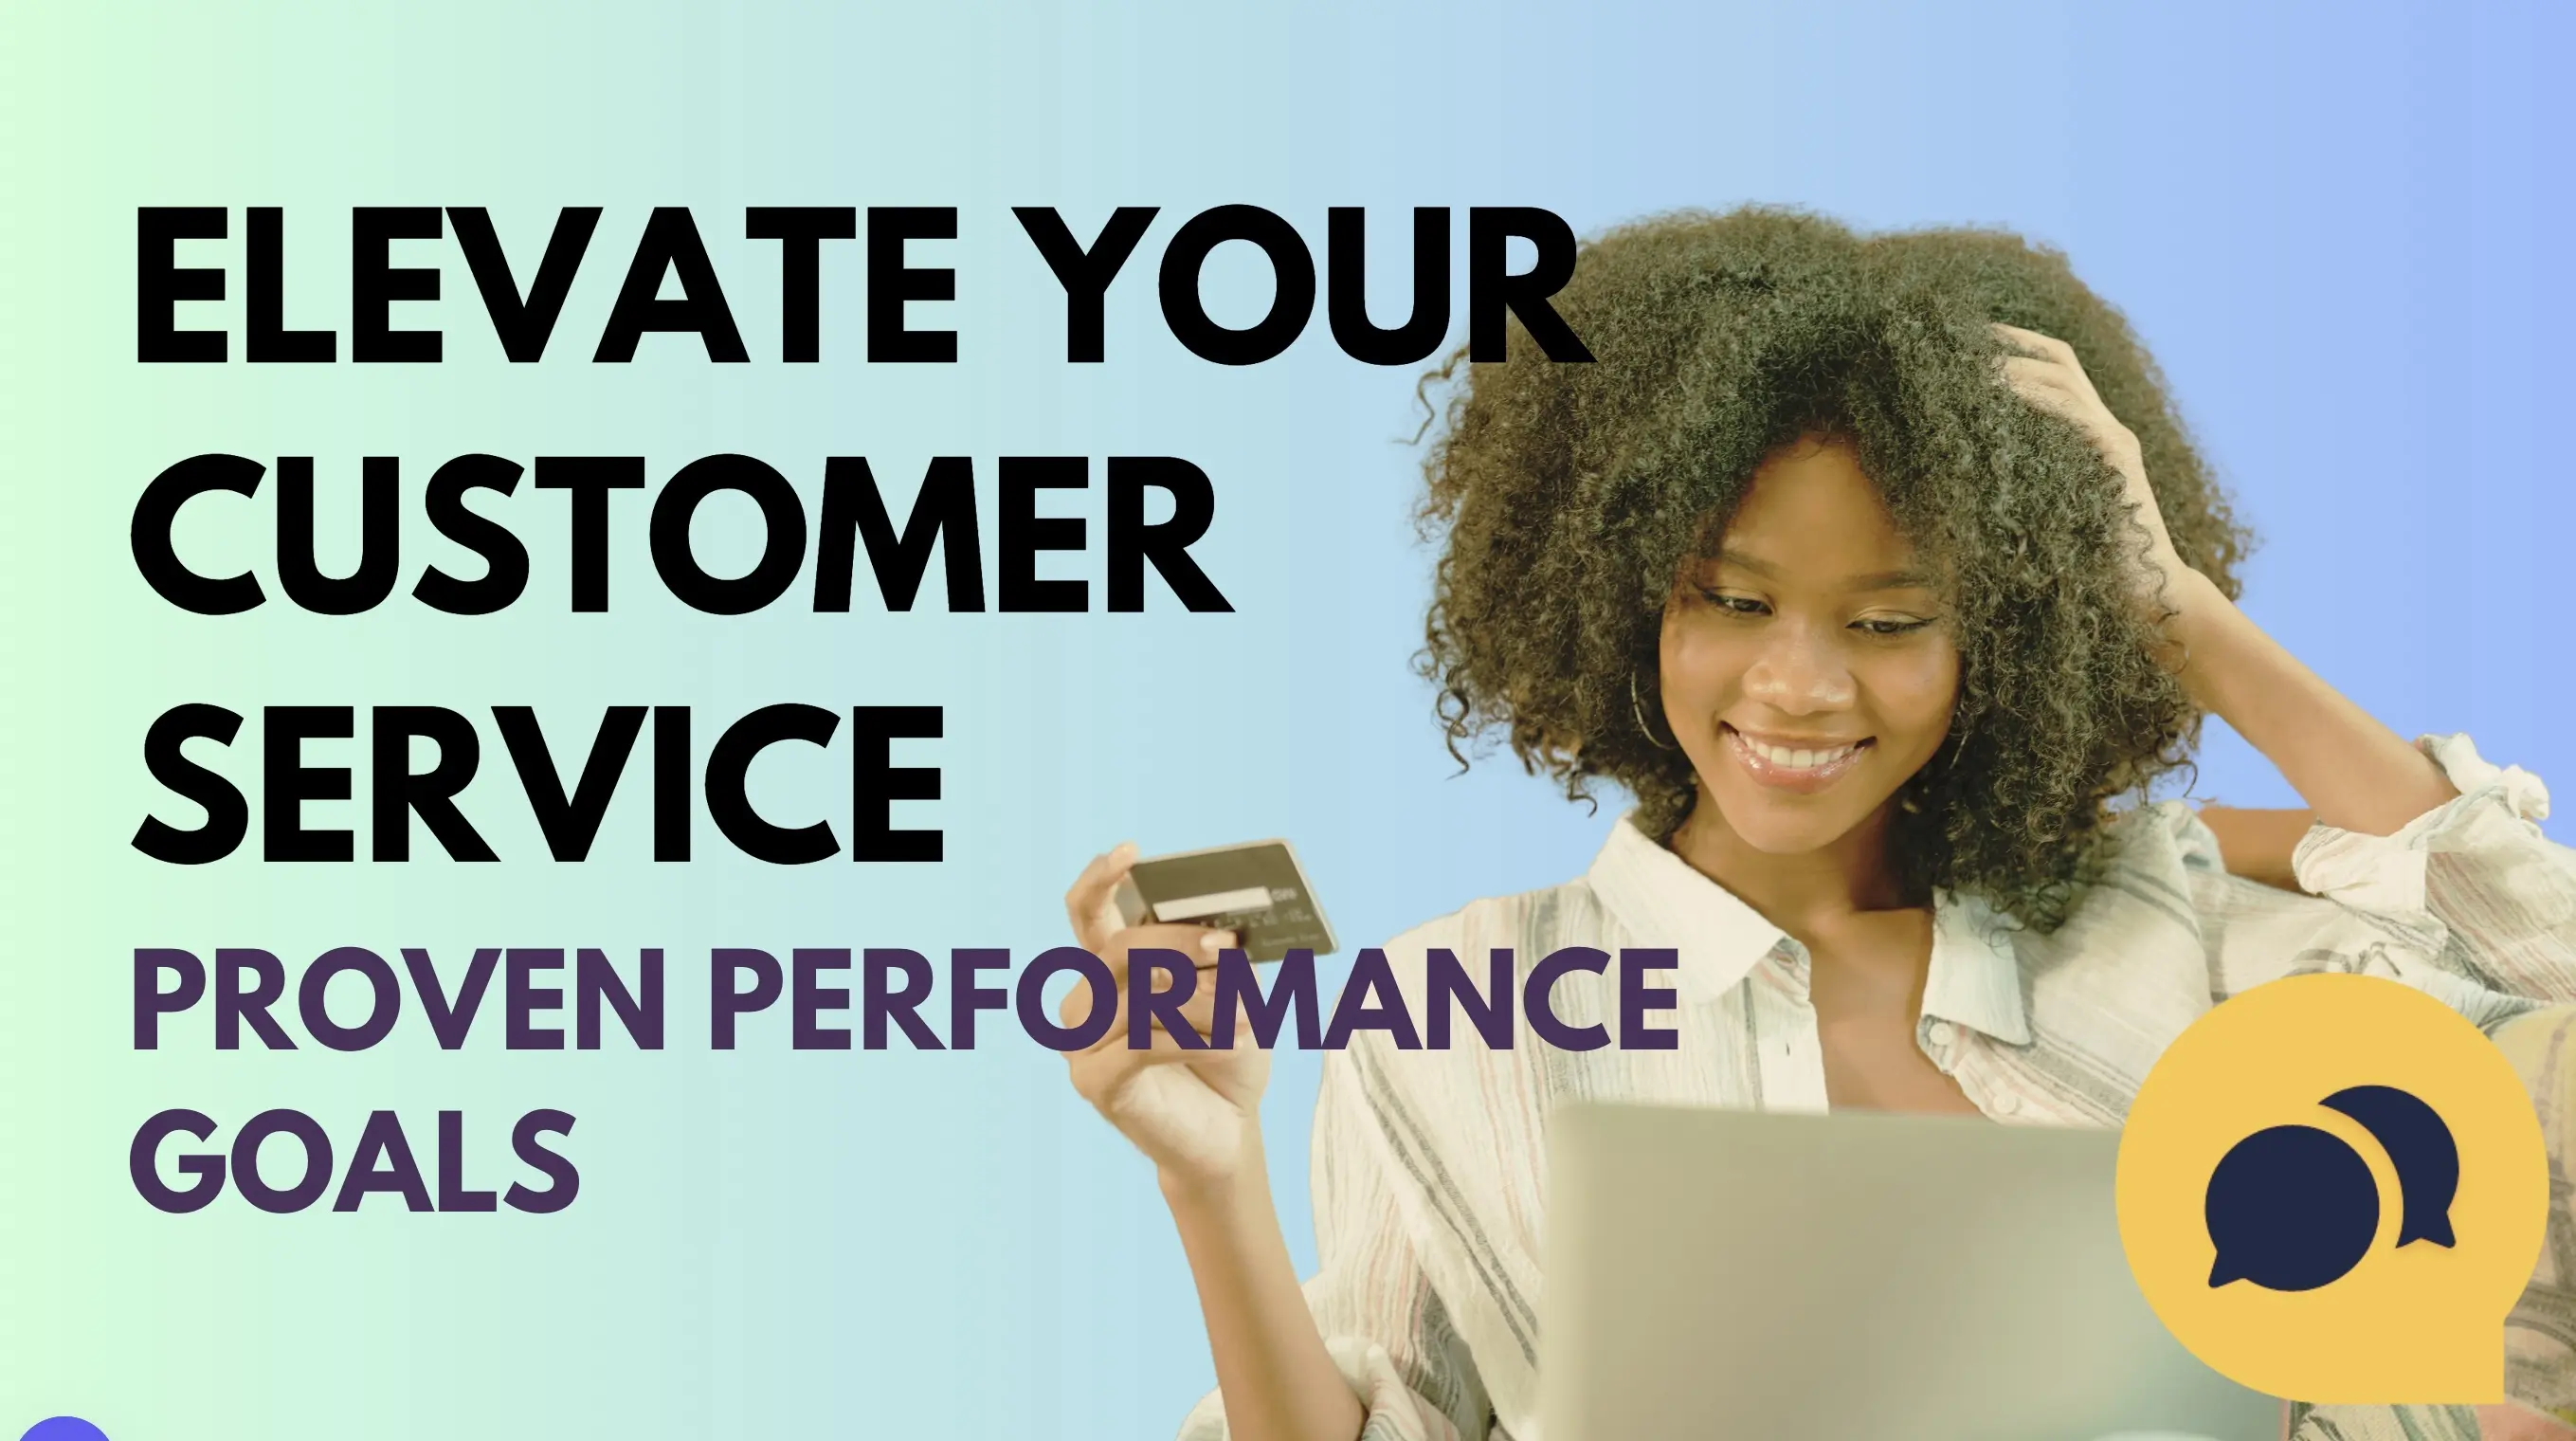 Elevate Your Customer Service With These Proven Performance Goals